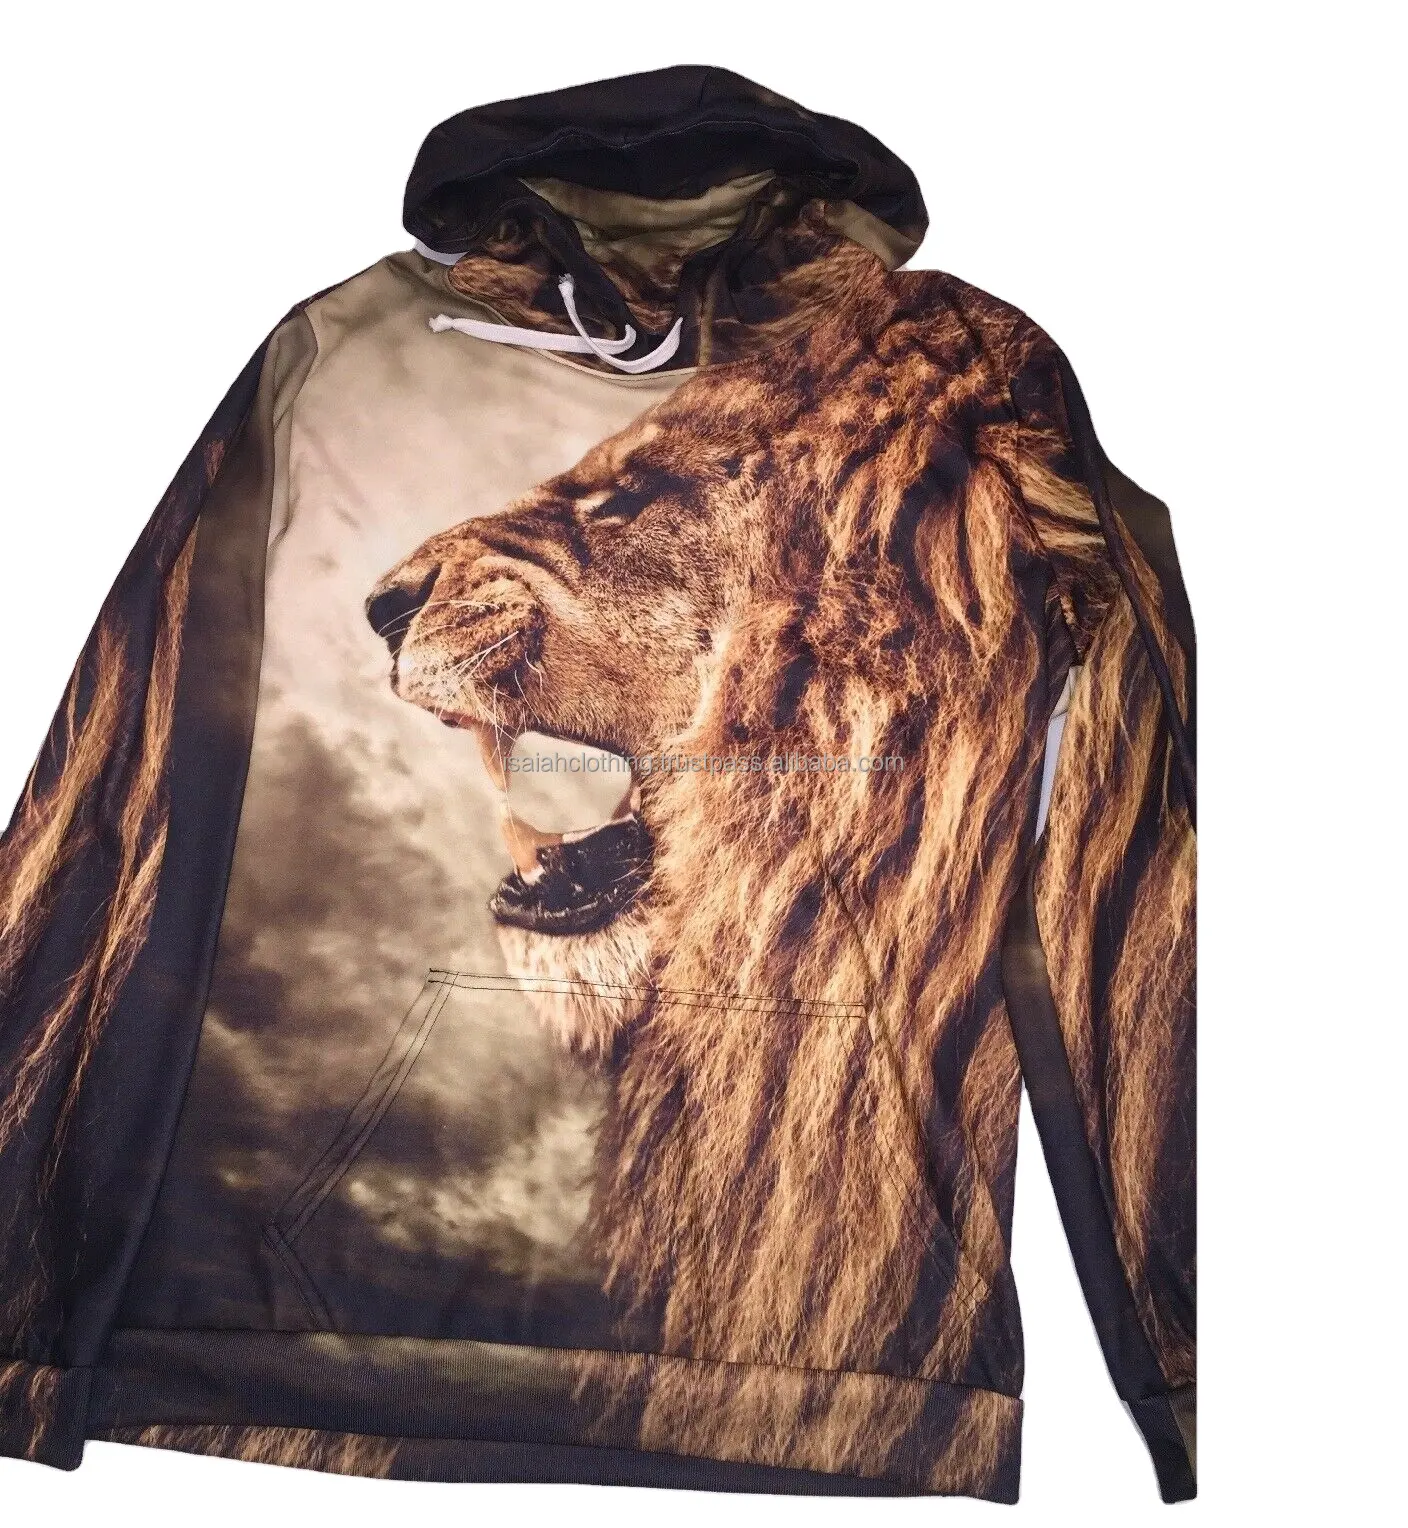 Sublimation Hoodies All Over Printed Animal Design Hoodies for sale in wholesale price